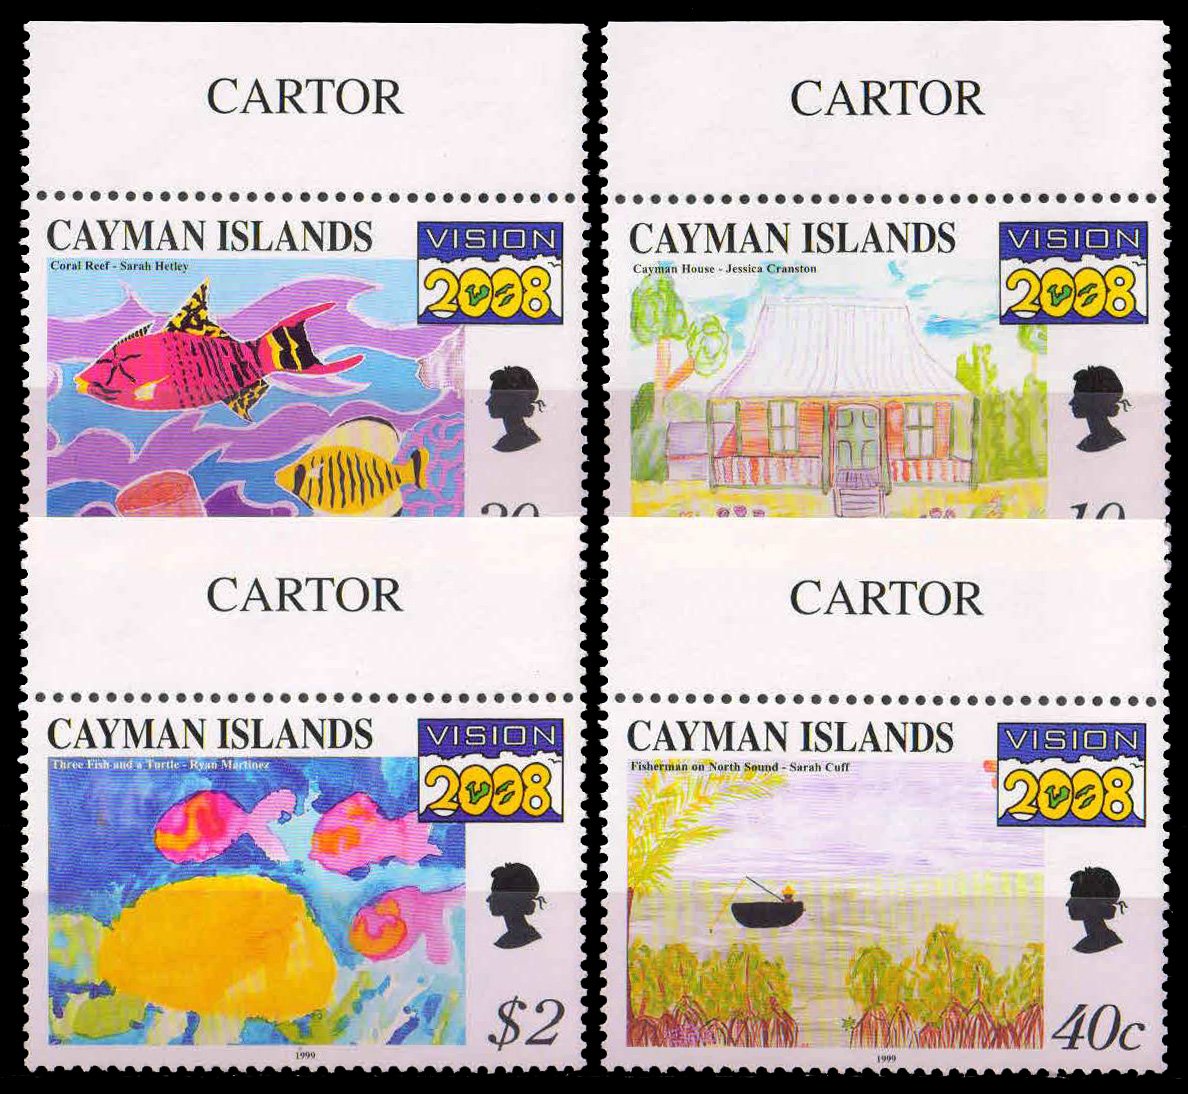 CAYMAN ISLANDS 1999-Vision 2008 Project, Paintings, Set of 4, MNH, S.G. 888-891, Cat £ 7-